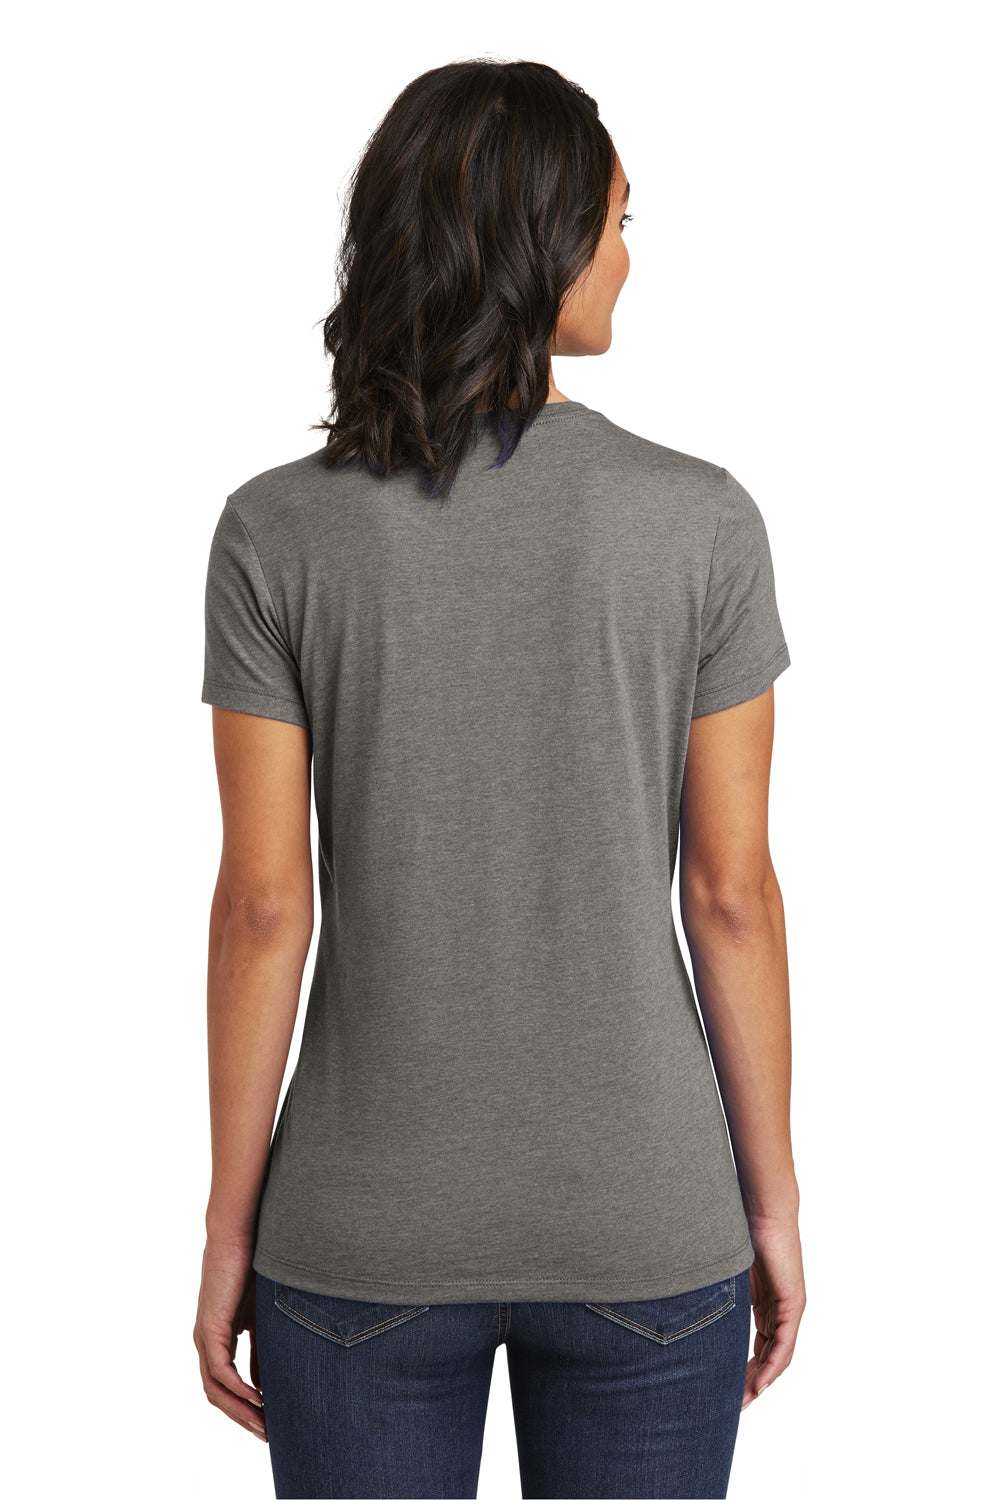 District DT6002 Womens Very Important Short Sleeve Crewneck T-Shirt Heather Grey Back